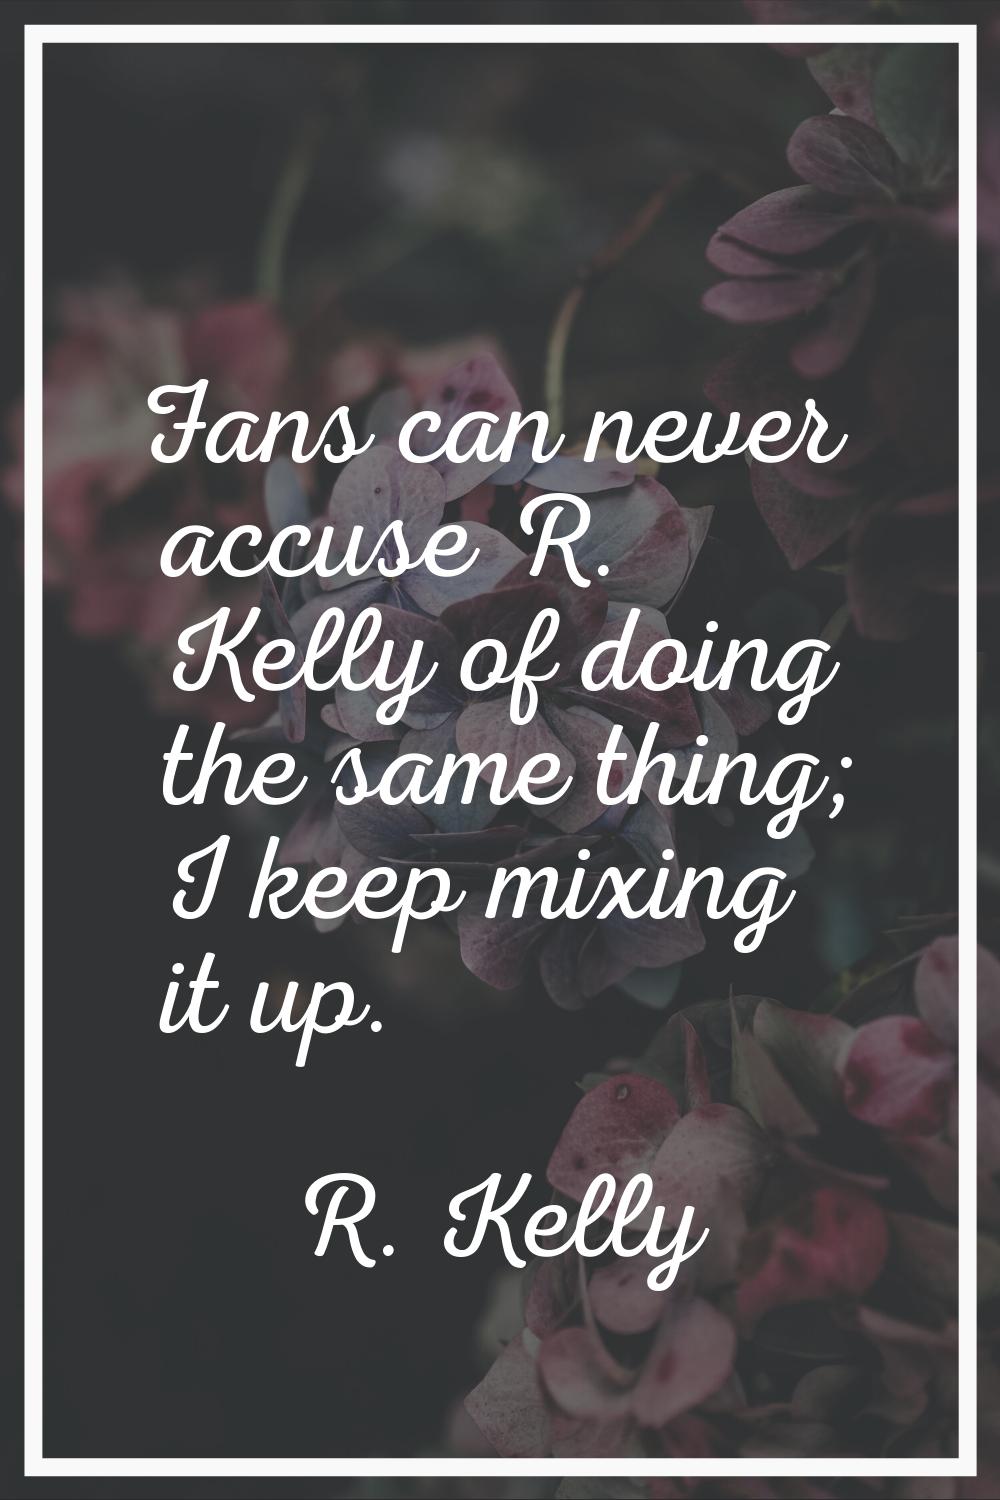 Fans can never accuse R. Kelly of doing the same thing; I keep mixing it up.